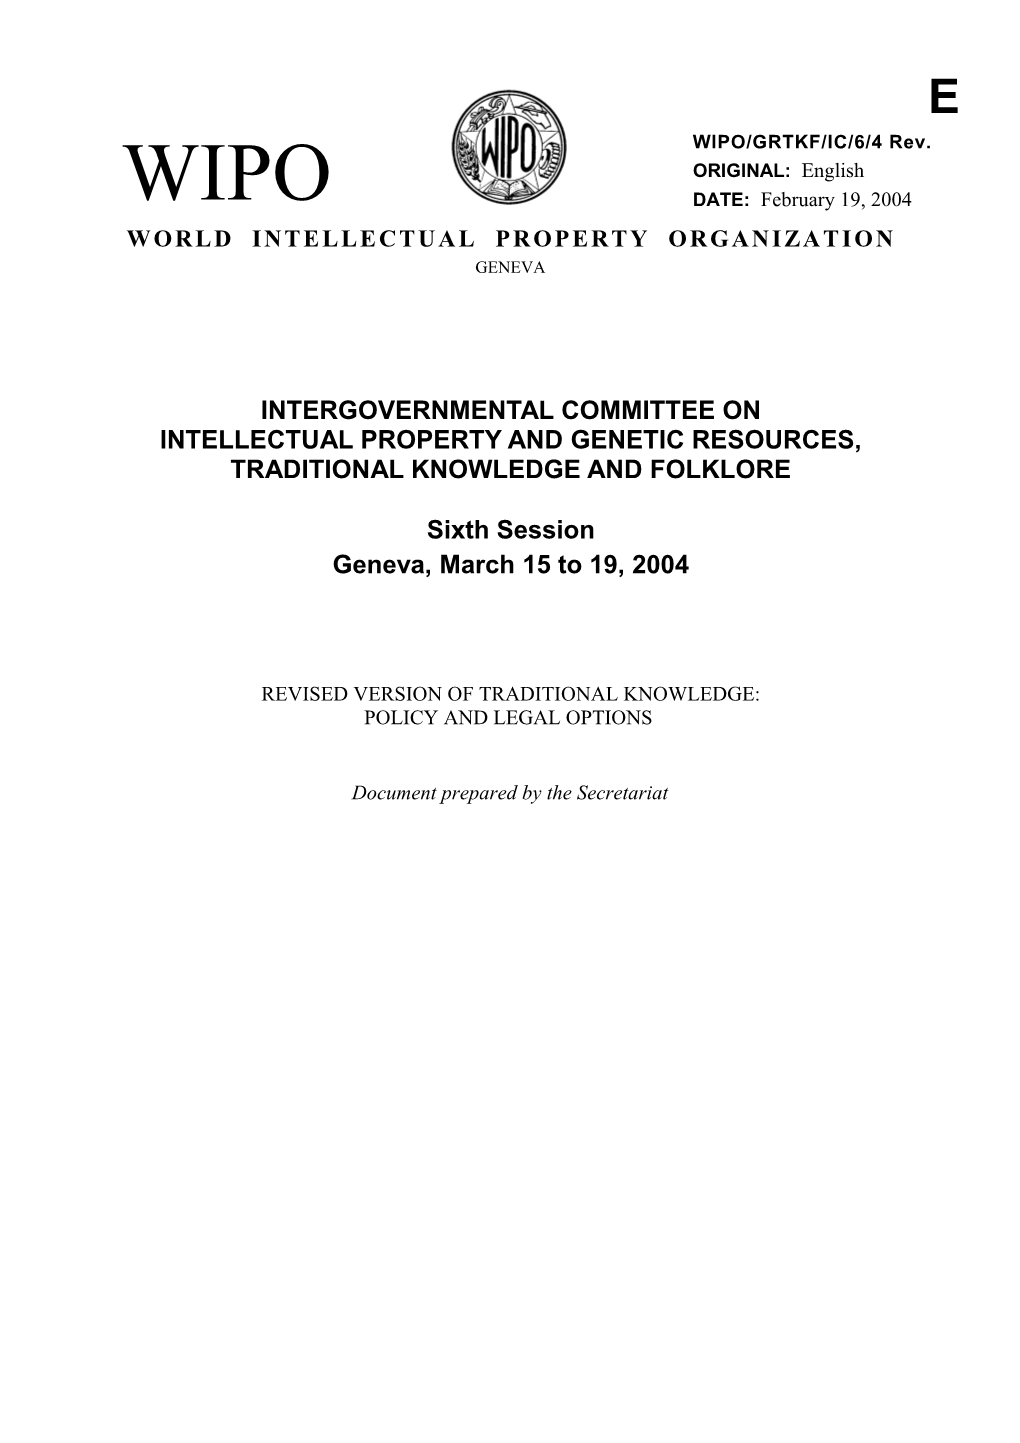 WIPO/GRTKF/IC/6/4 REV.: Revised Version of Traditional Knowledge: Policy and Legal Options